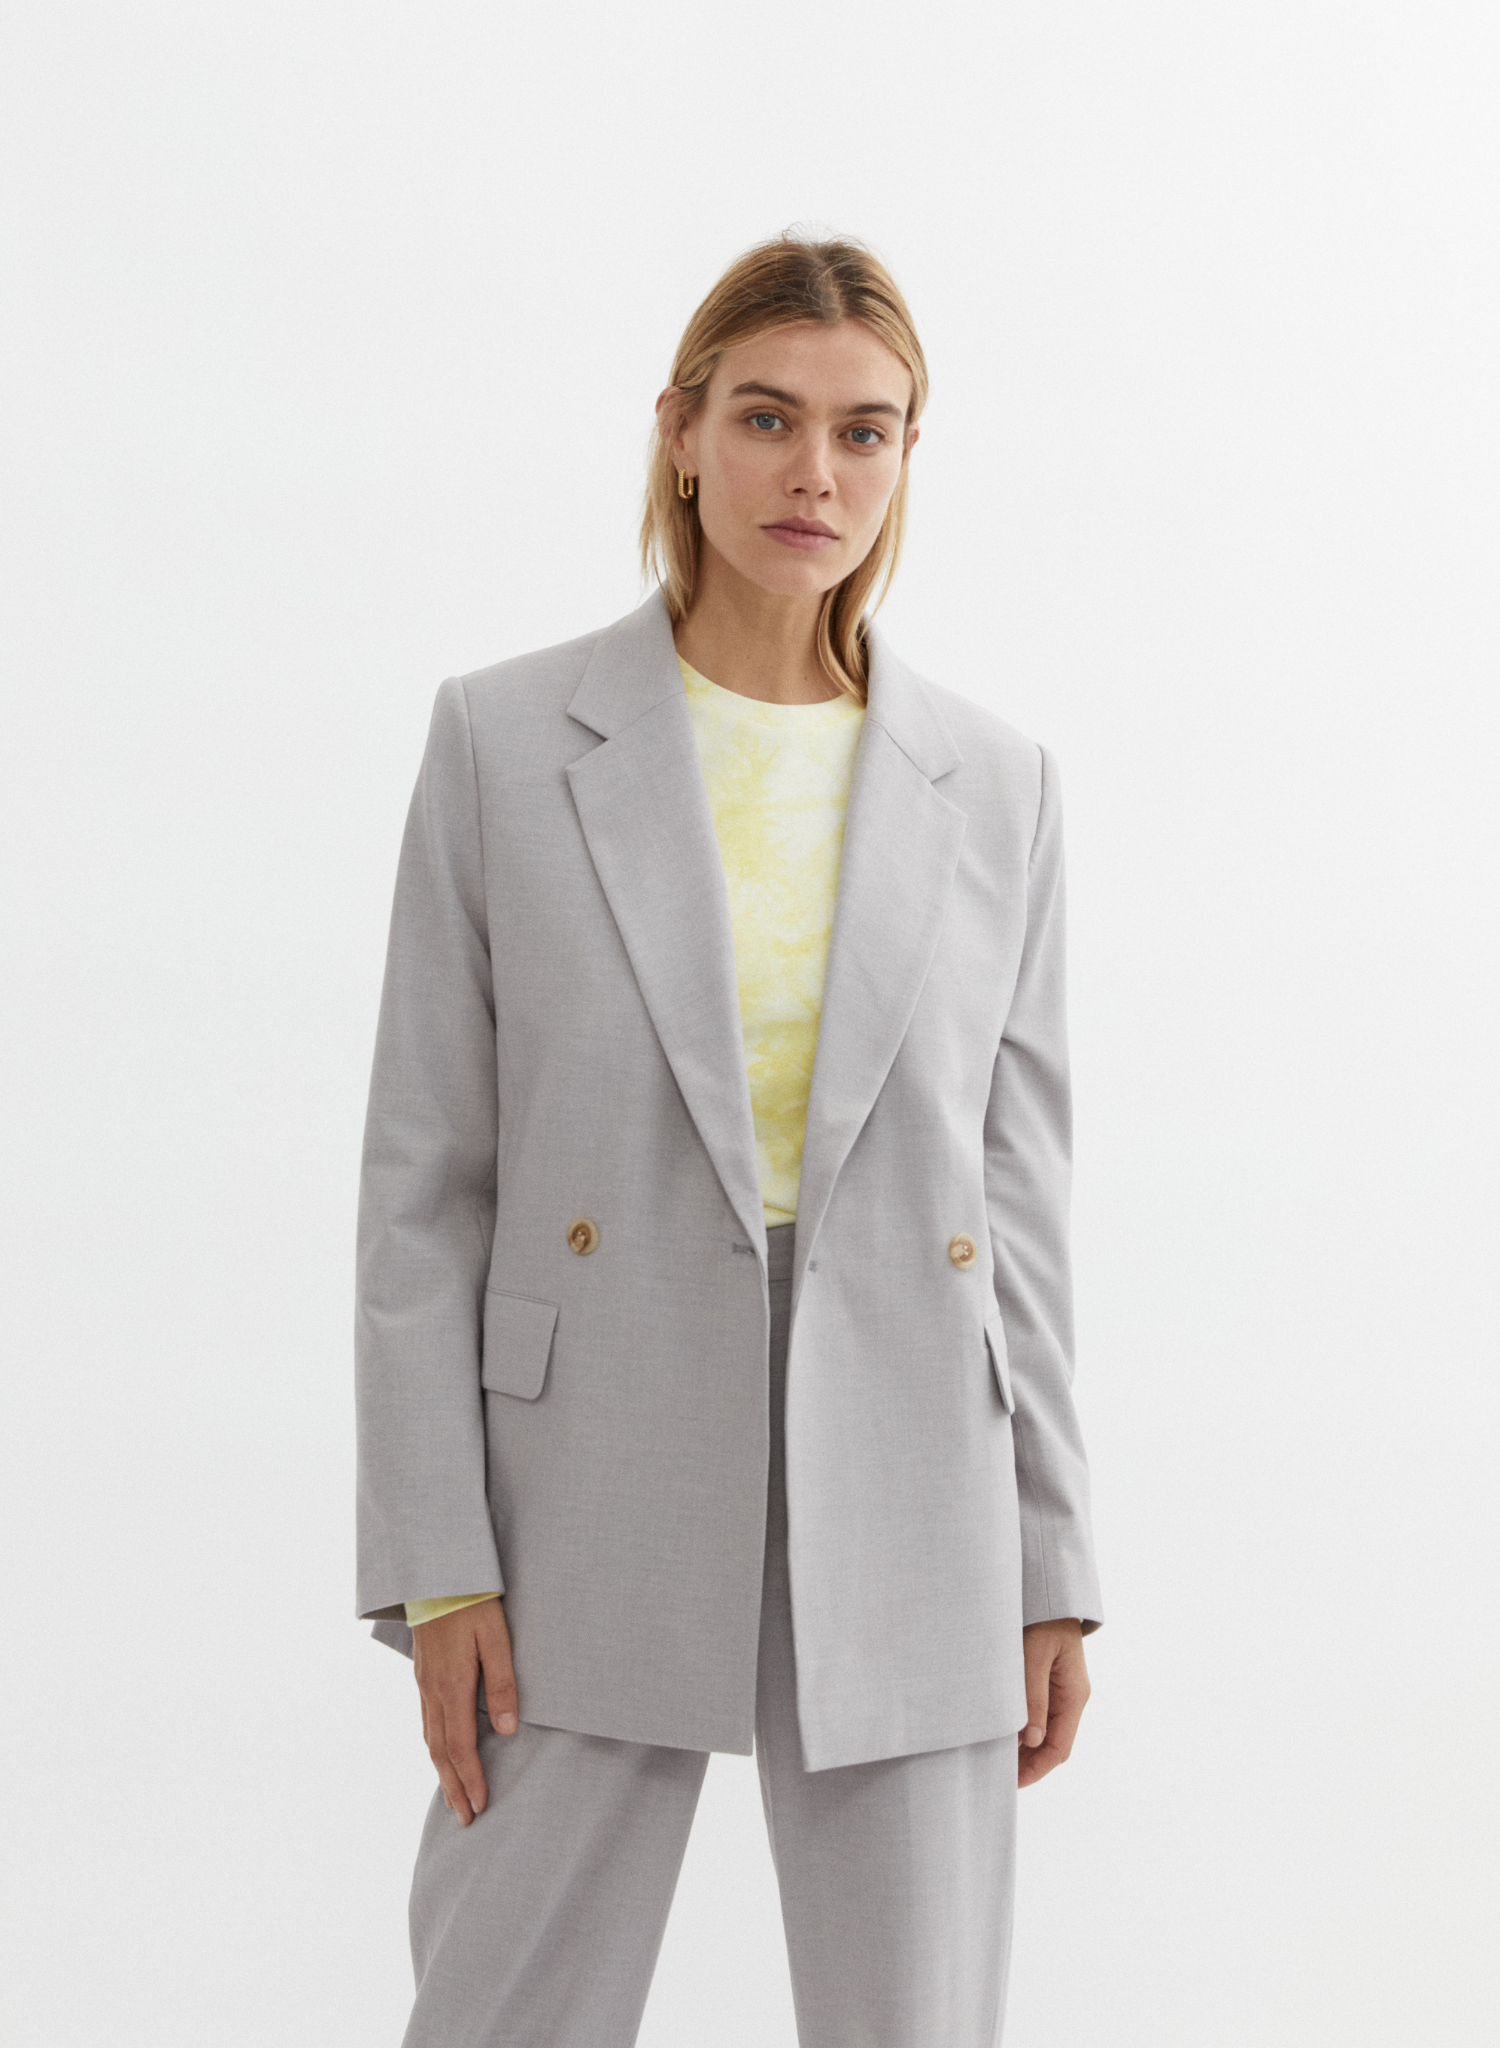 Destined for repeat wear in the minimalist wardrobe, the Lawrence Blazer offers an all-season, all-occasion aesthetic. Exaggerated shoulders, relaxed sleeves and an oversized fit add coveted comfort and effortless style. 